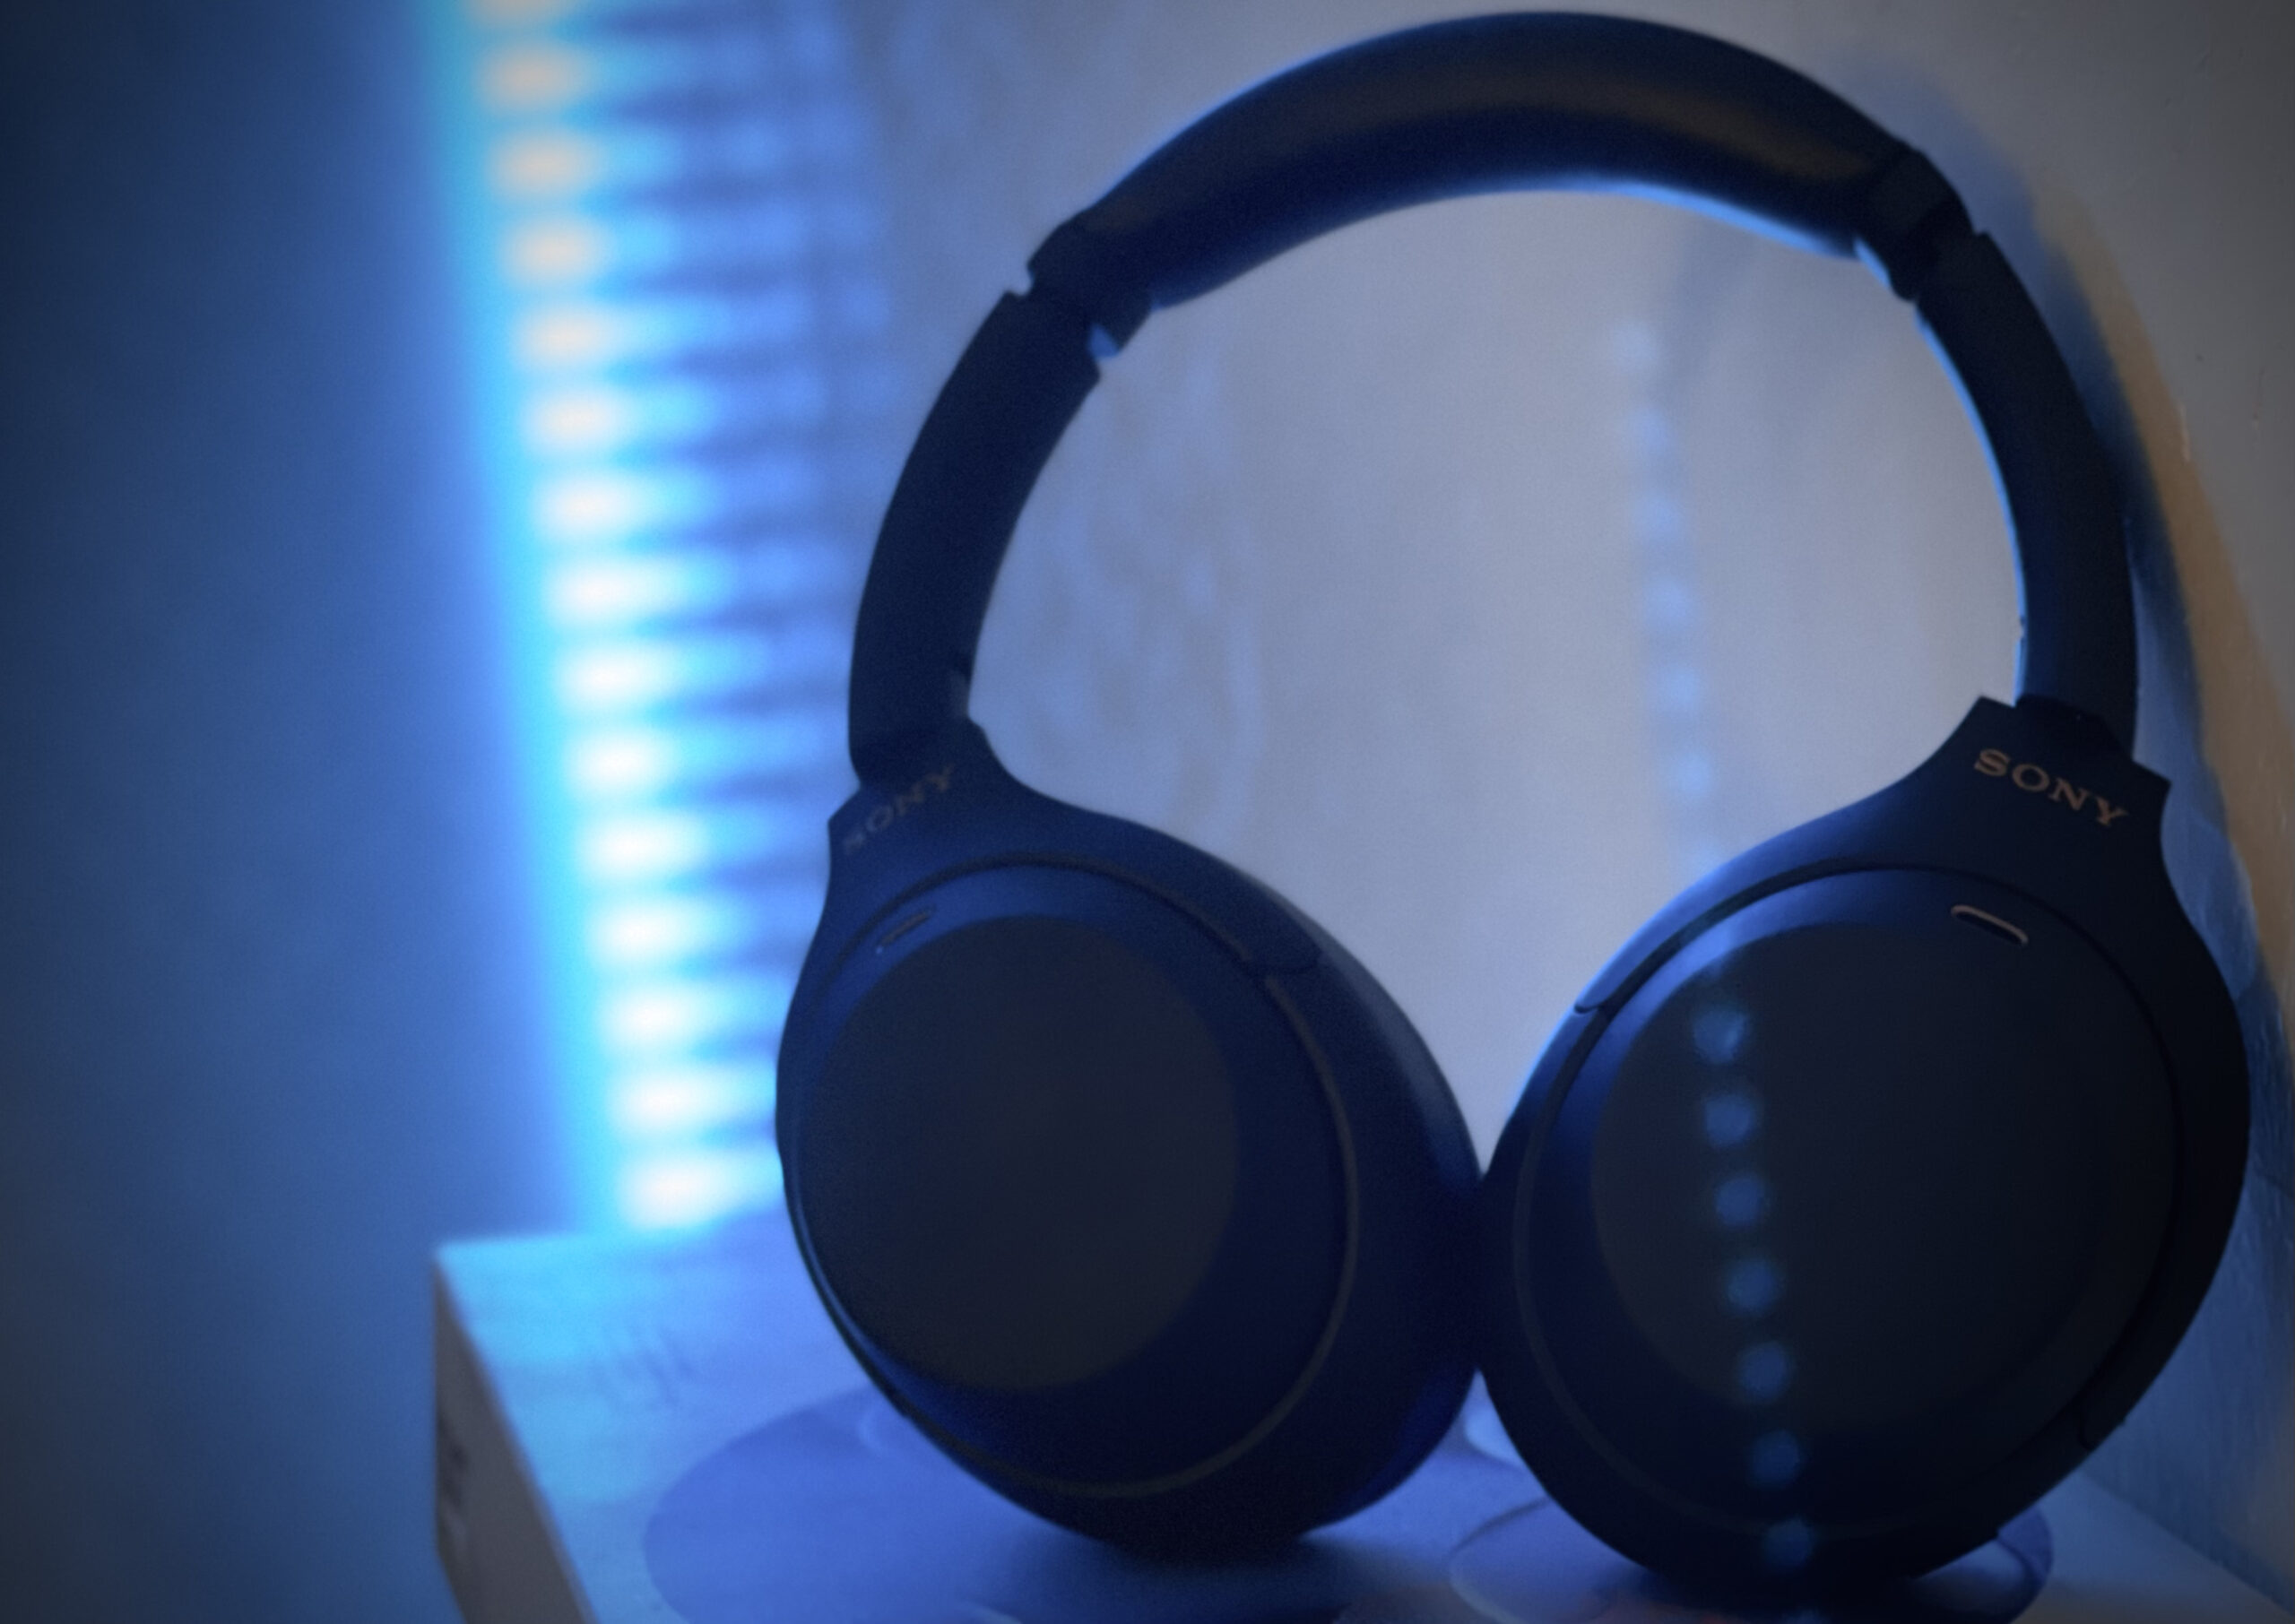 Headphones sitting in front of a glowing background.